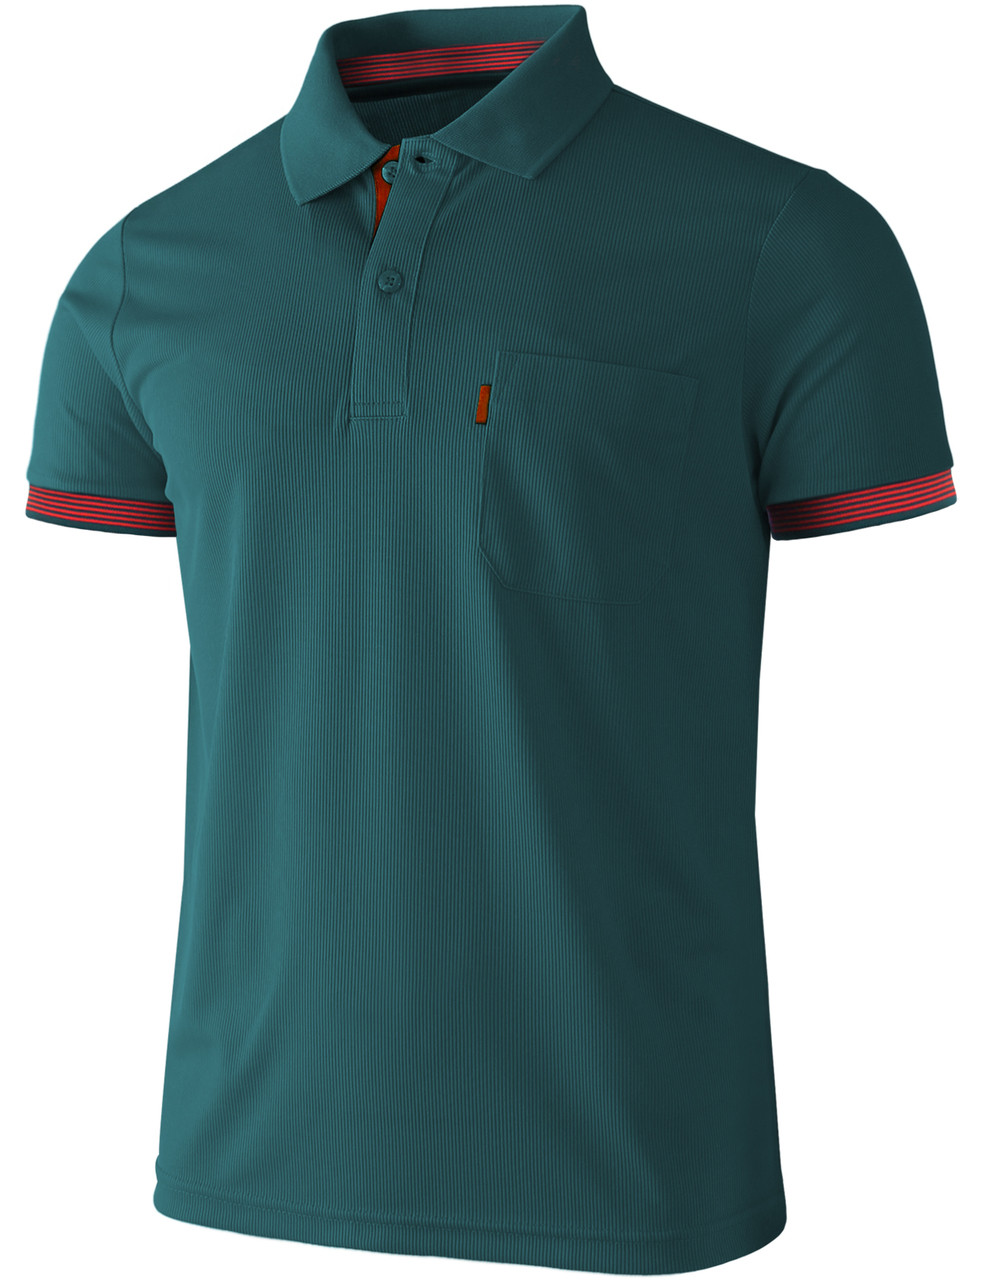  Men 2 Tone Coolon Fabric Polo Collar Short Sleeve Tees  WHITELIGHTGREEN Size L : Clothing, Shoes & Jewelry